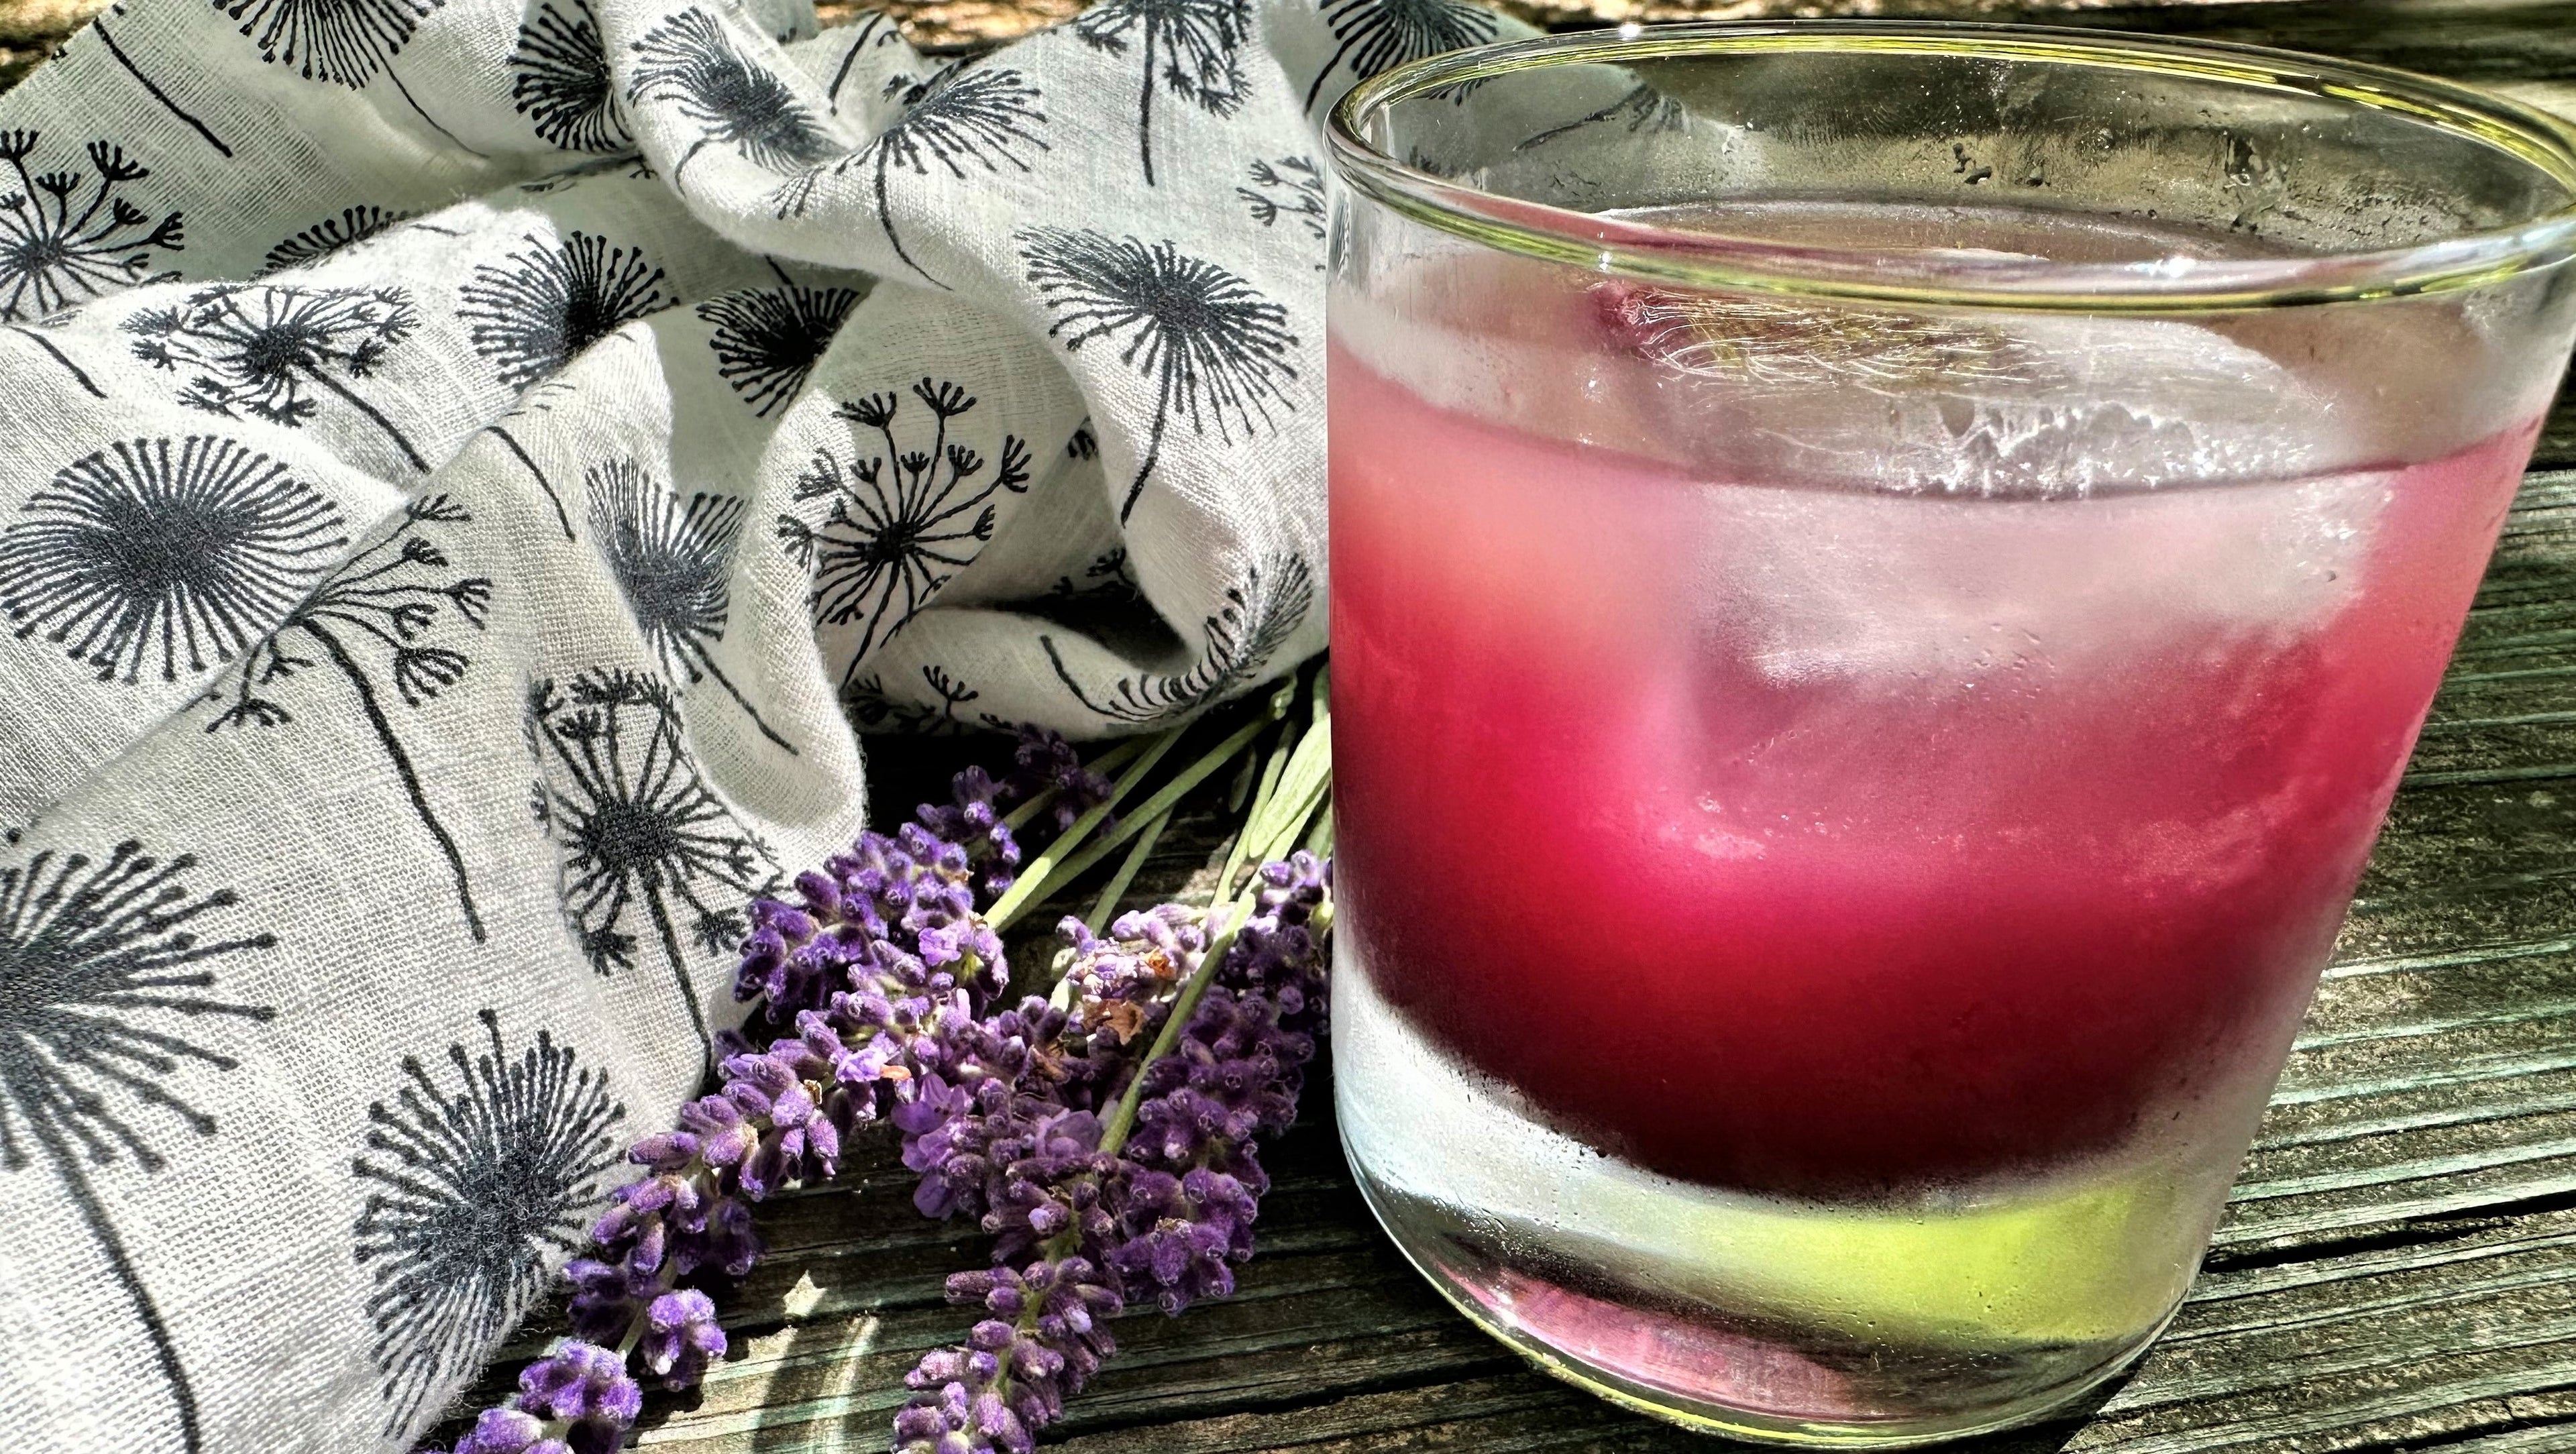 A highball glass full of bright magenta liquid and an ice cube on a wooden board with a floral napkin and fresh lavender blossoms.